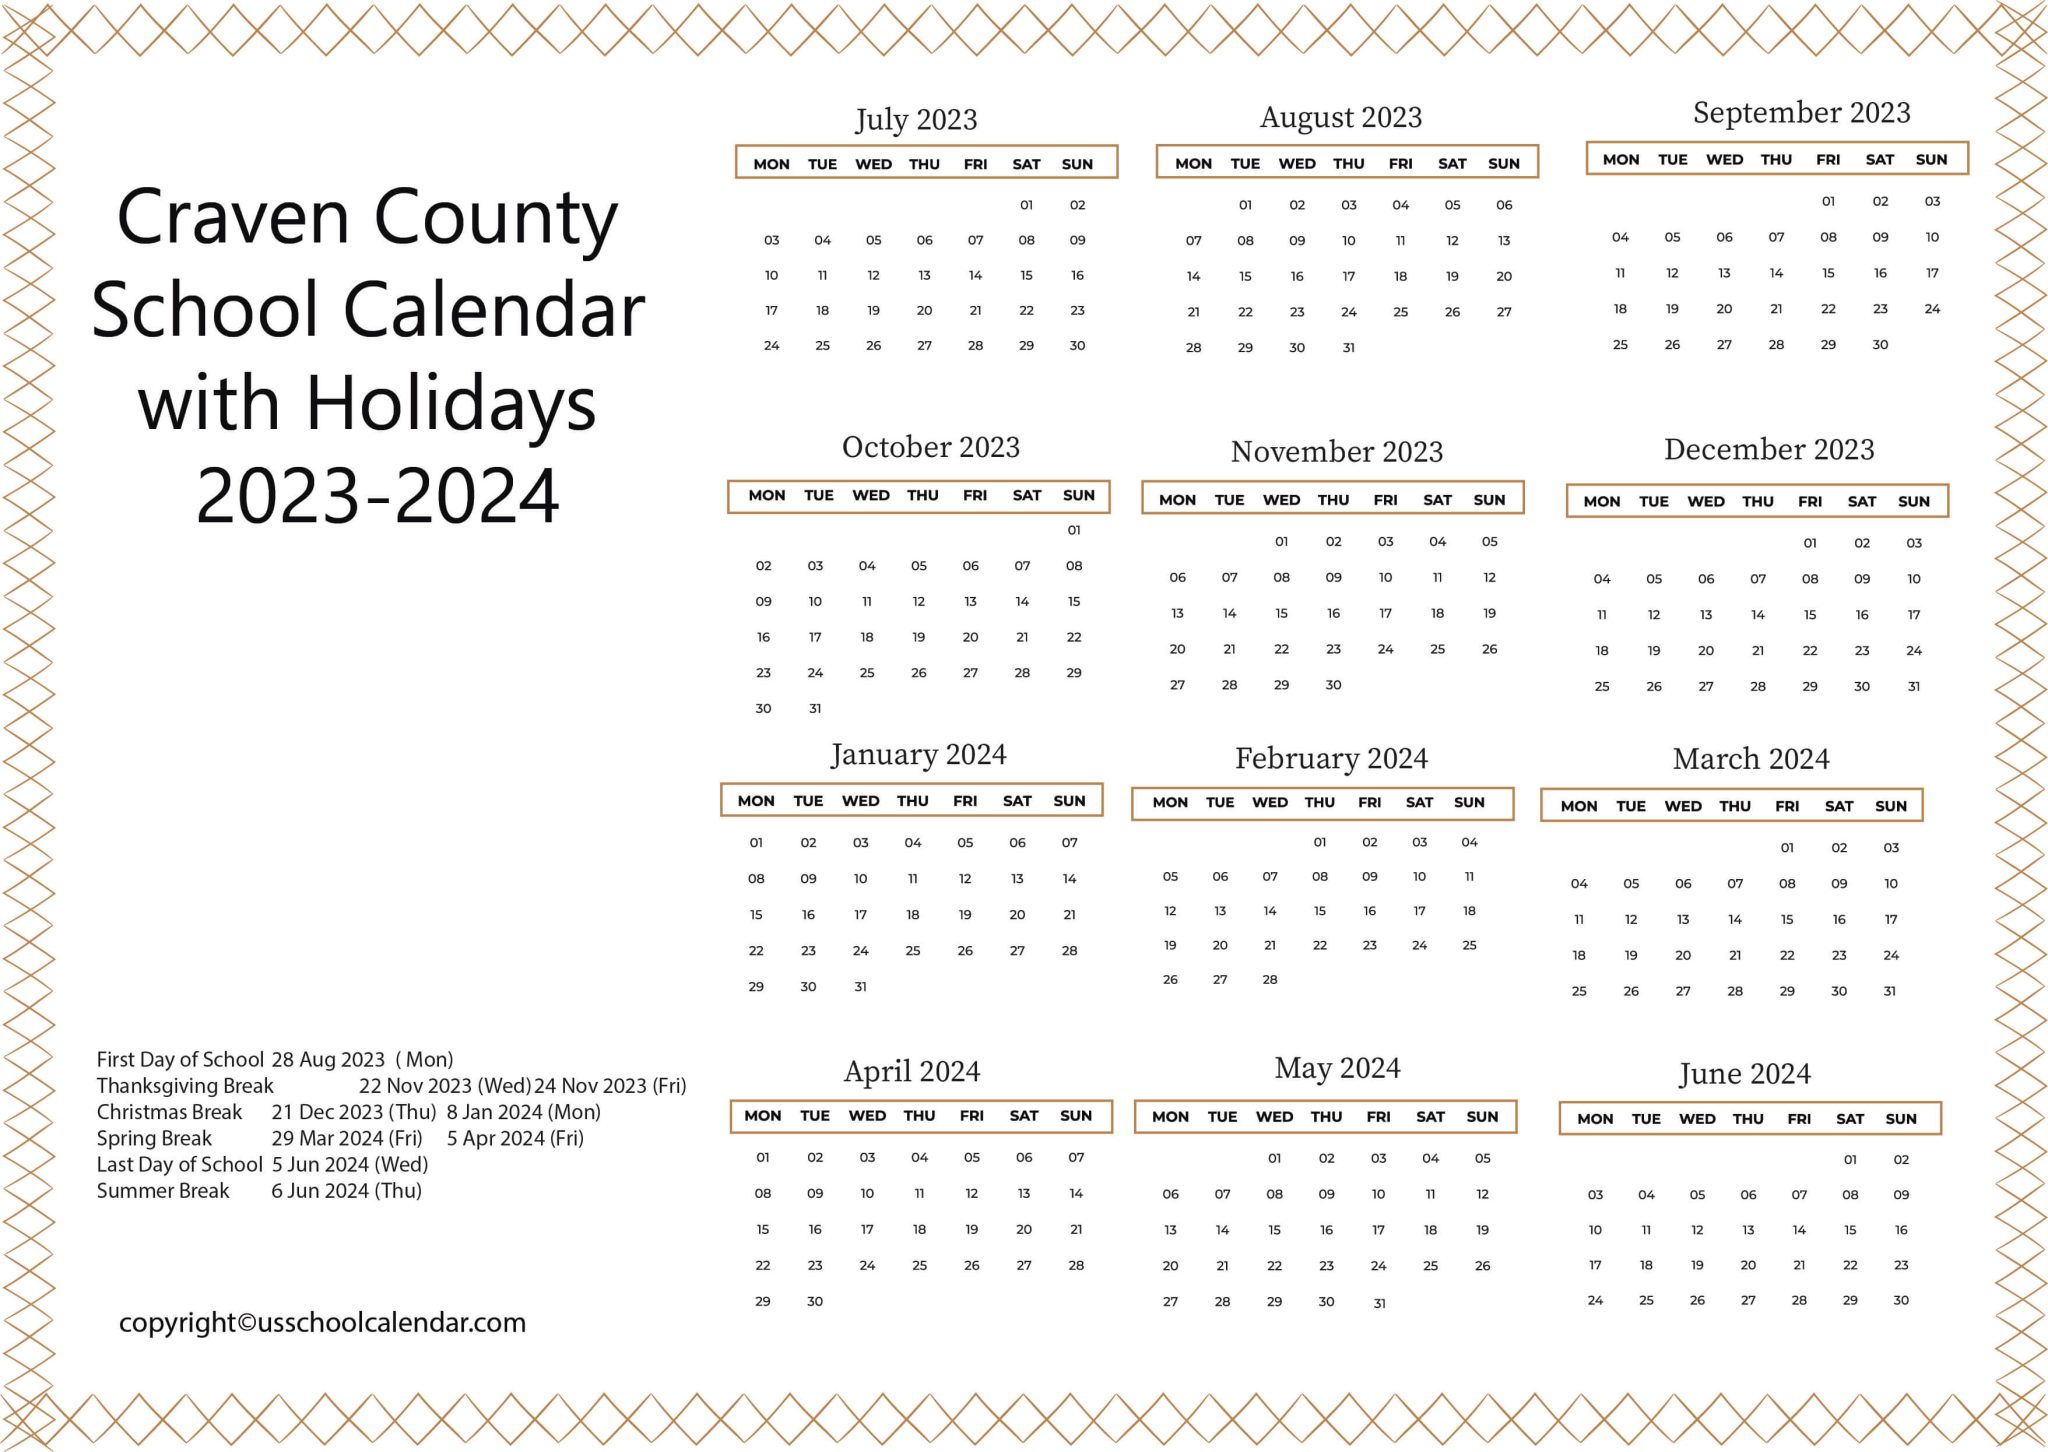 Craven County School Calendar with Holidays 2023 2024